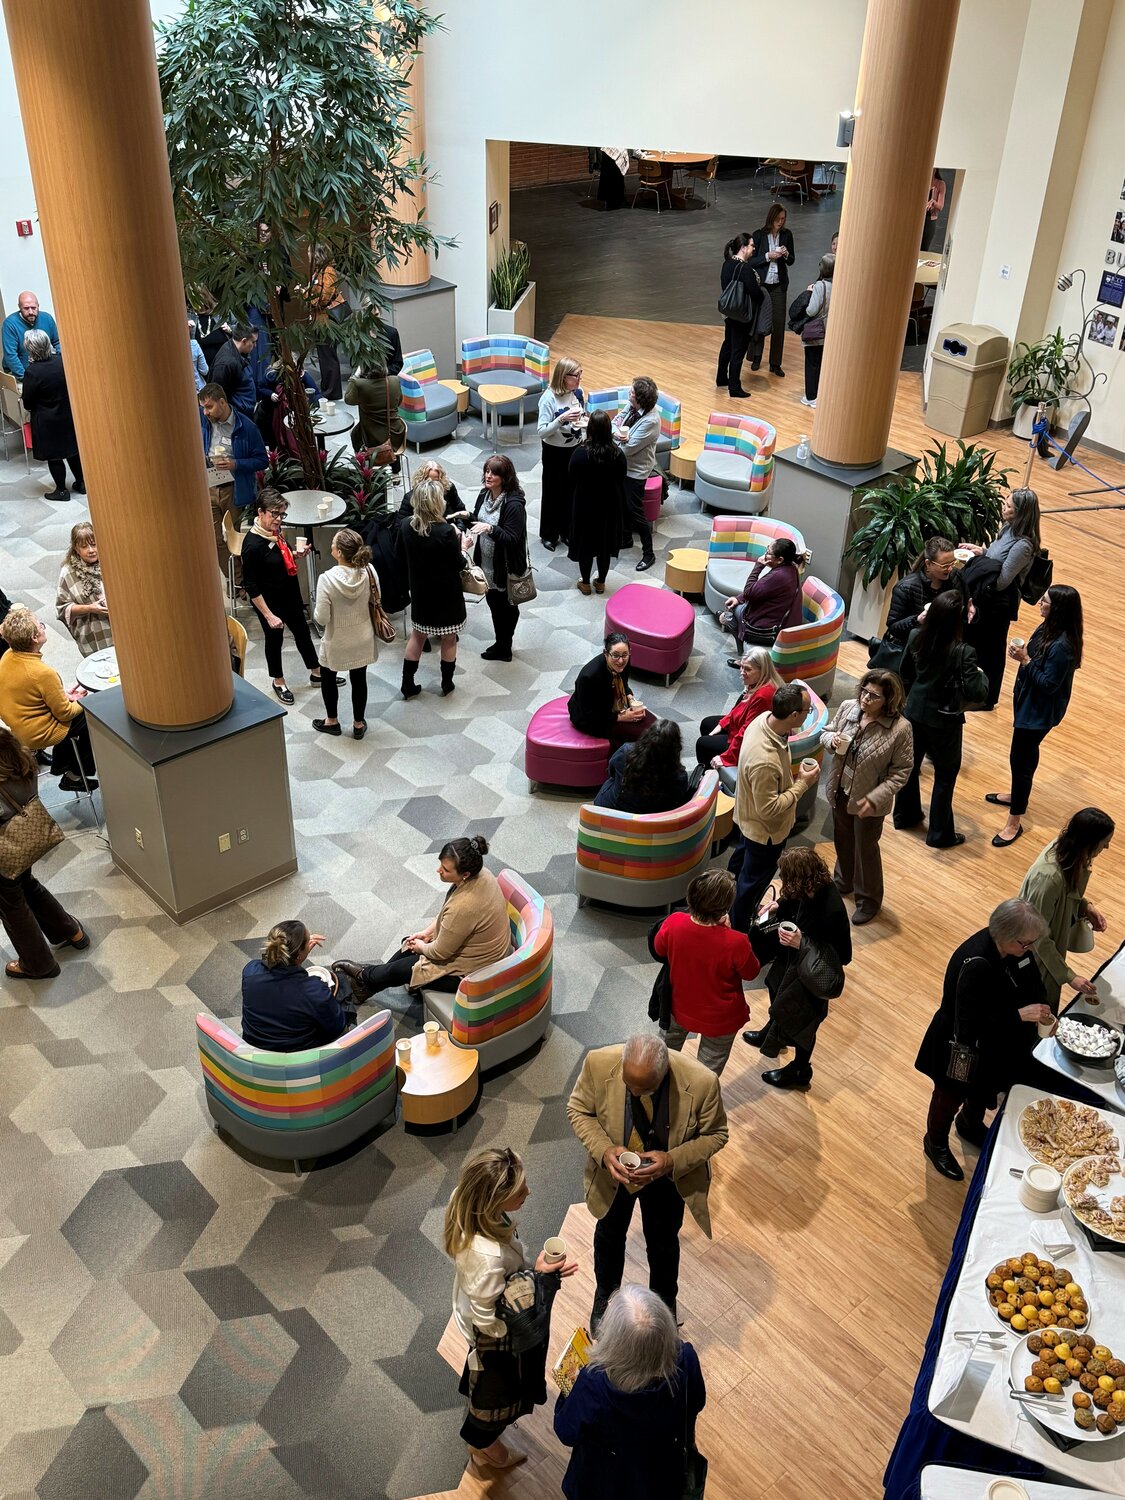 Representatives of Bucks County nonprofit organizations gathered at Bucks County Community College on March 20 to hear from Seattle-based speaker and presenter Vu Le at an event organized by Foundations Community Partnership.